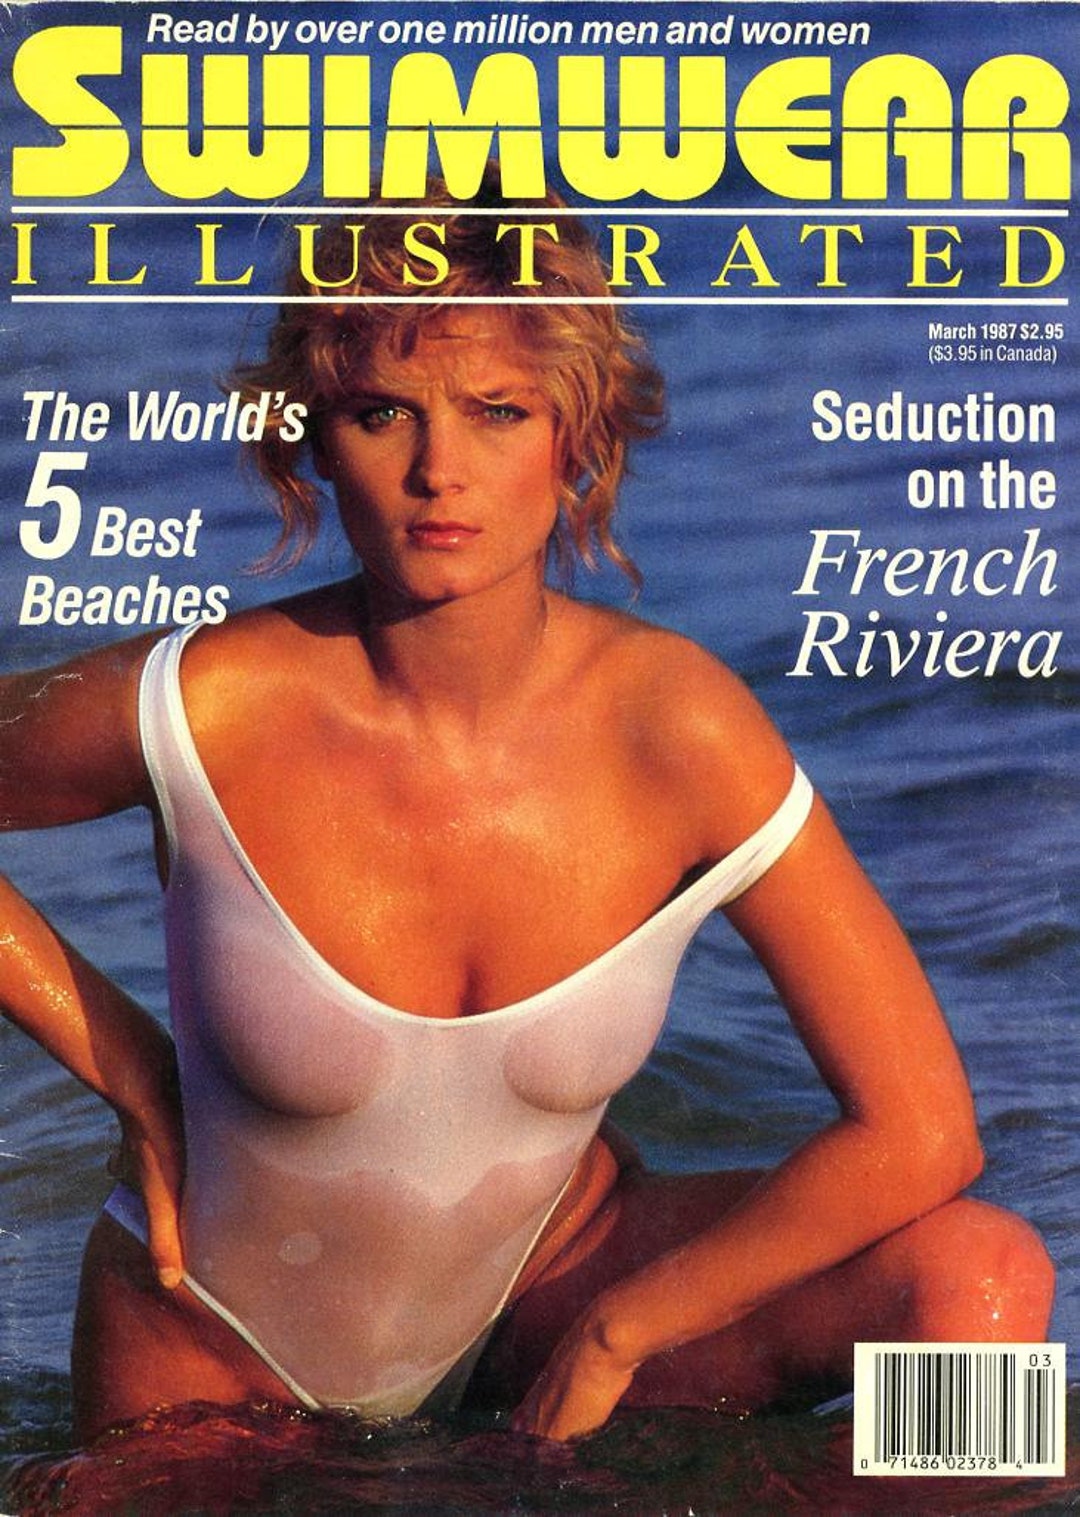 Swimwear Illustrated Magazine 1987 31 Years Old Packed With image